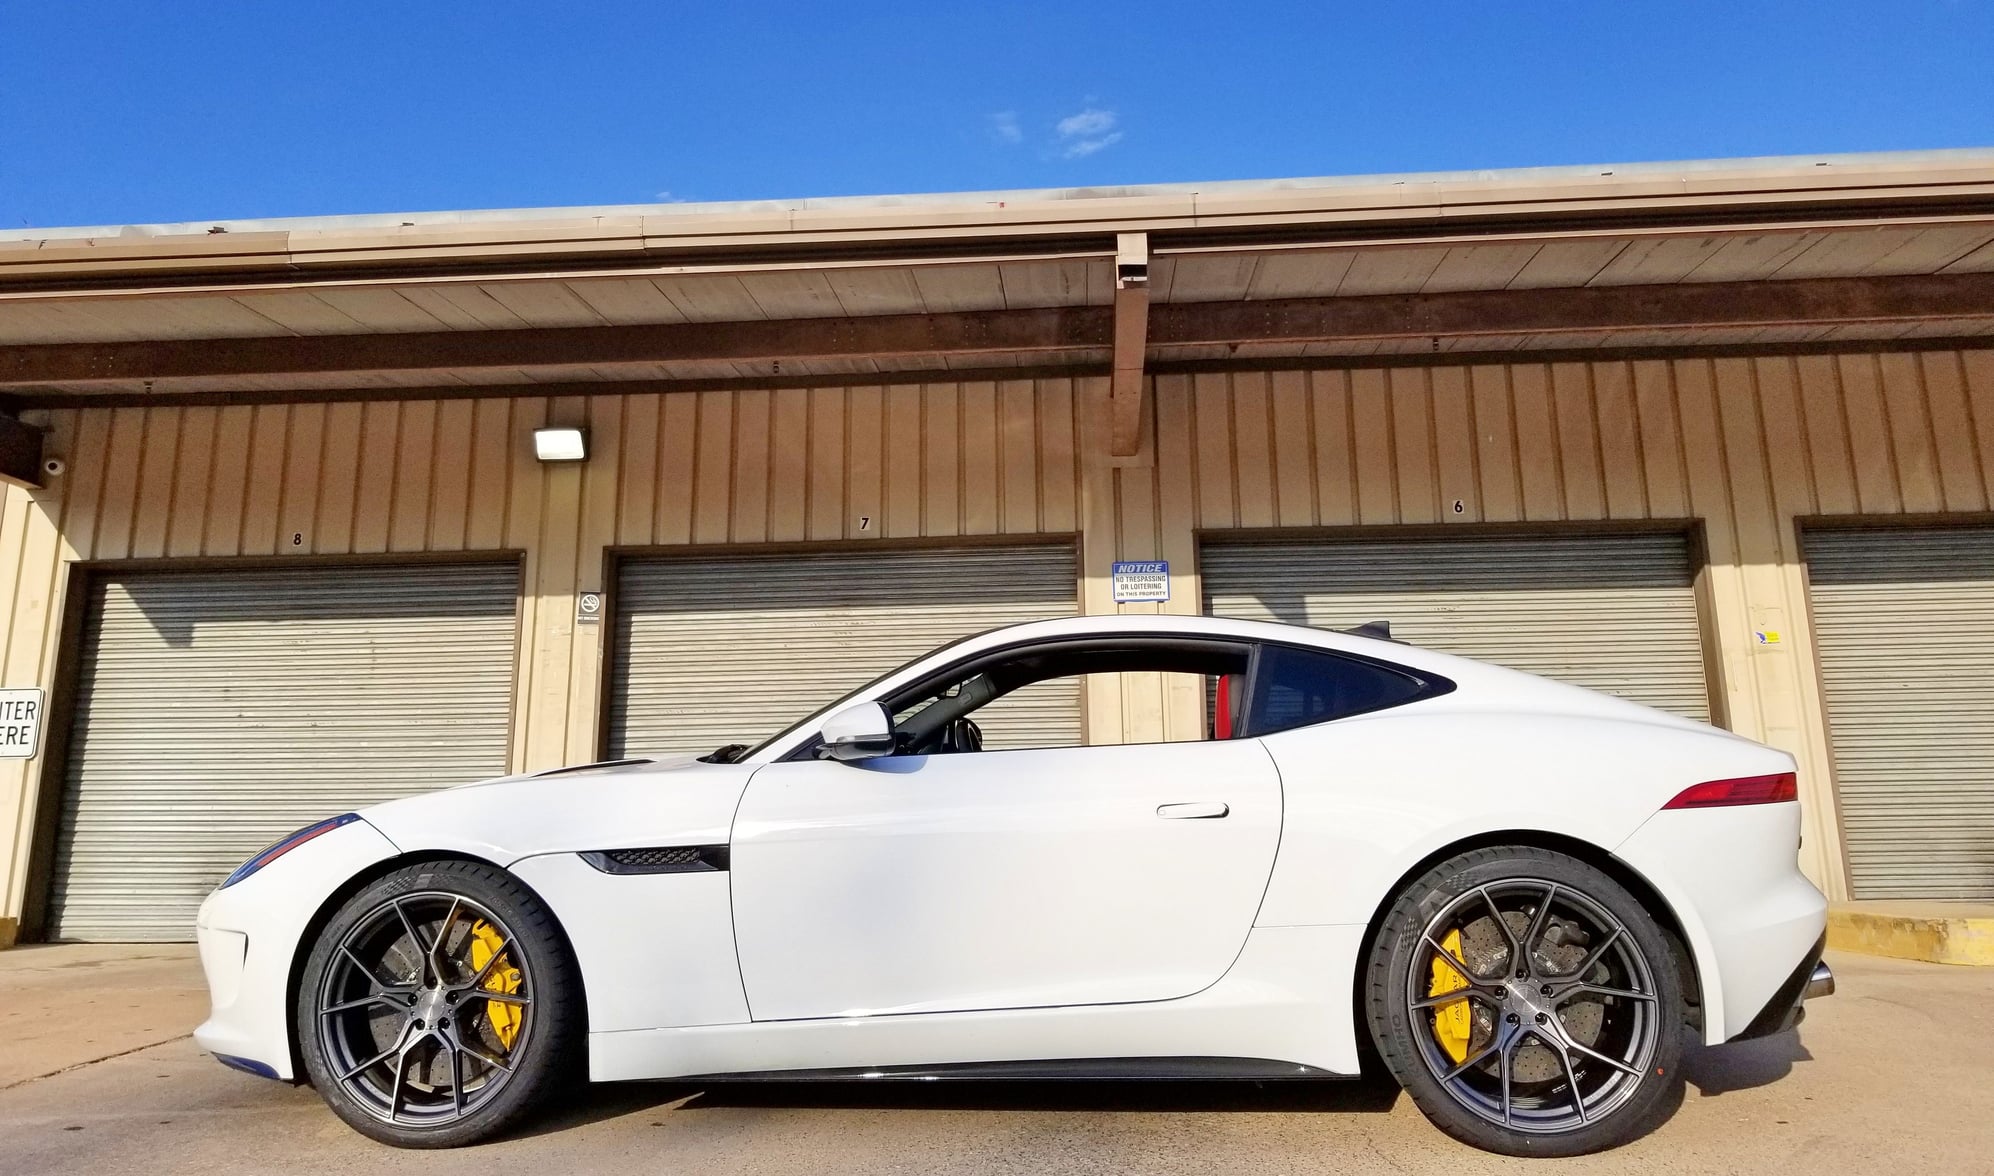 Wheels and Tires/Axles - Stance SF07 20x9.5/10 with Kumho Ecsta PS91 tires - Used - 2014 to 2020 Jaguar F-Type - Fort Worth, TX 76116, United States